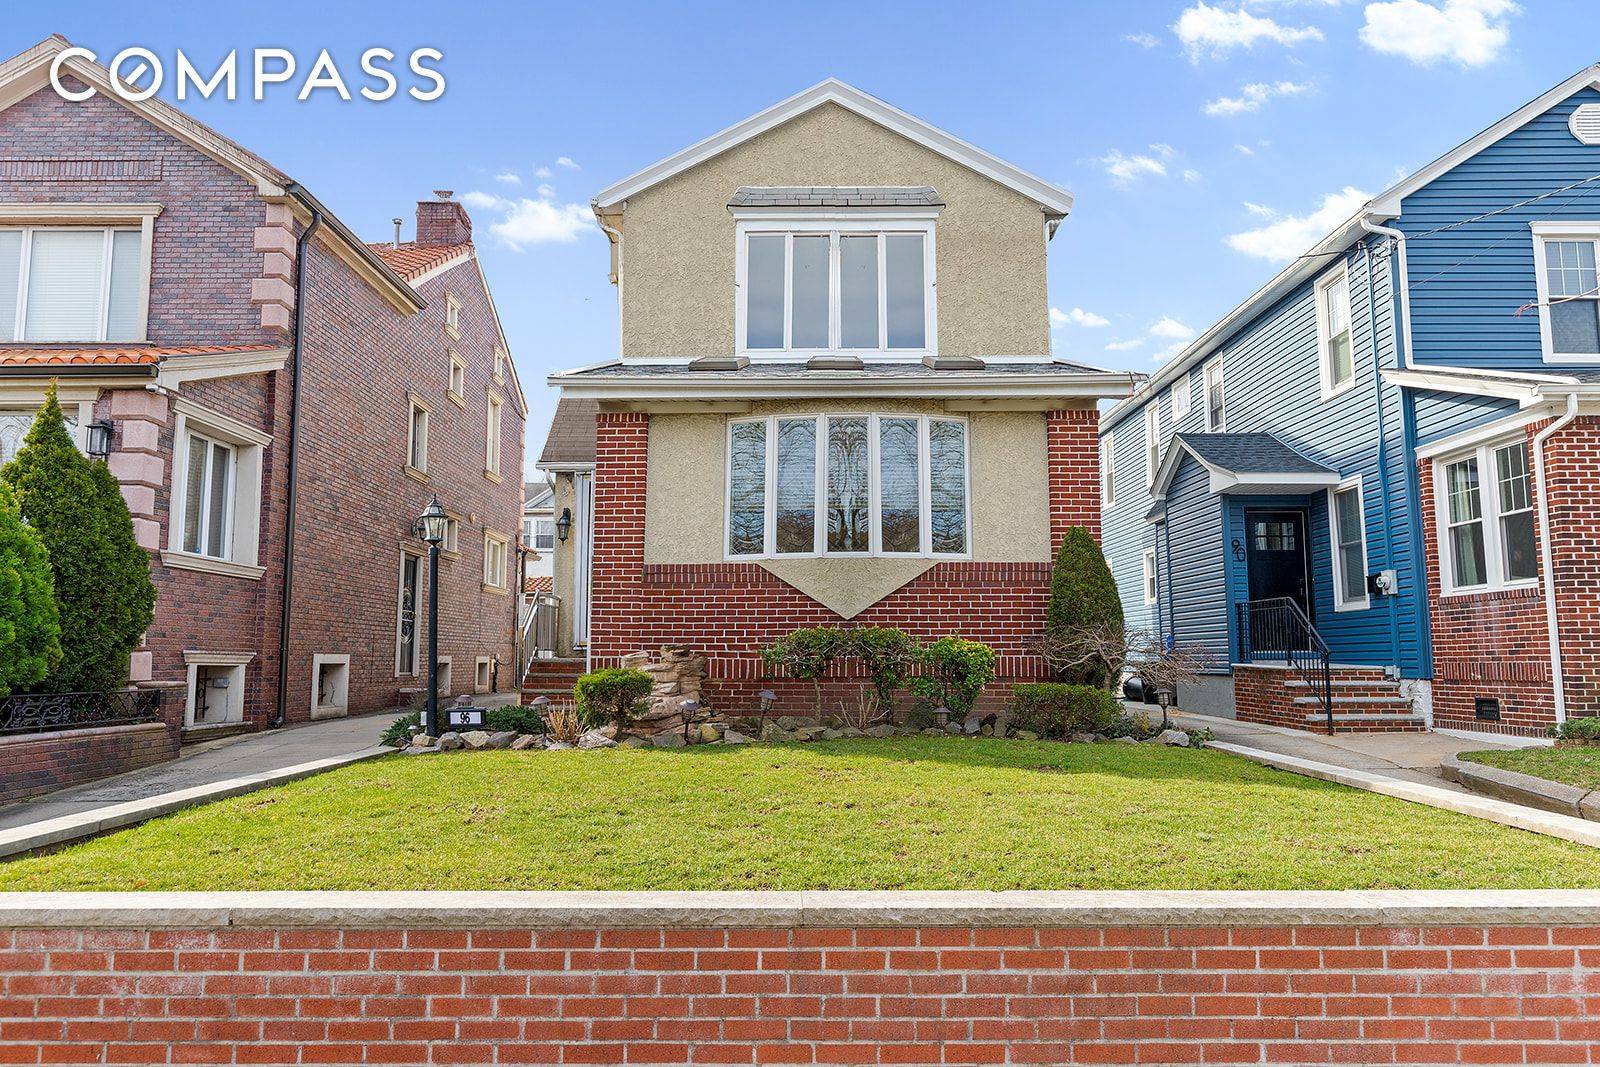 Nestled on one of the most coveted blocks in Bay Ridge, this fully detached Colonial home offers the perfect blend of classic charm and modern convenience.